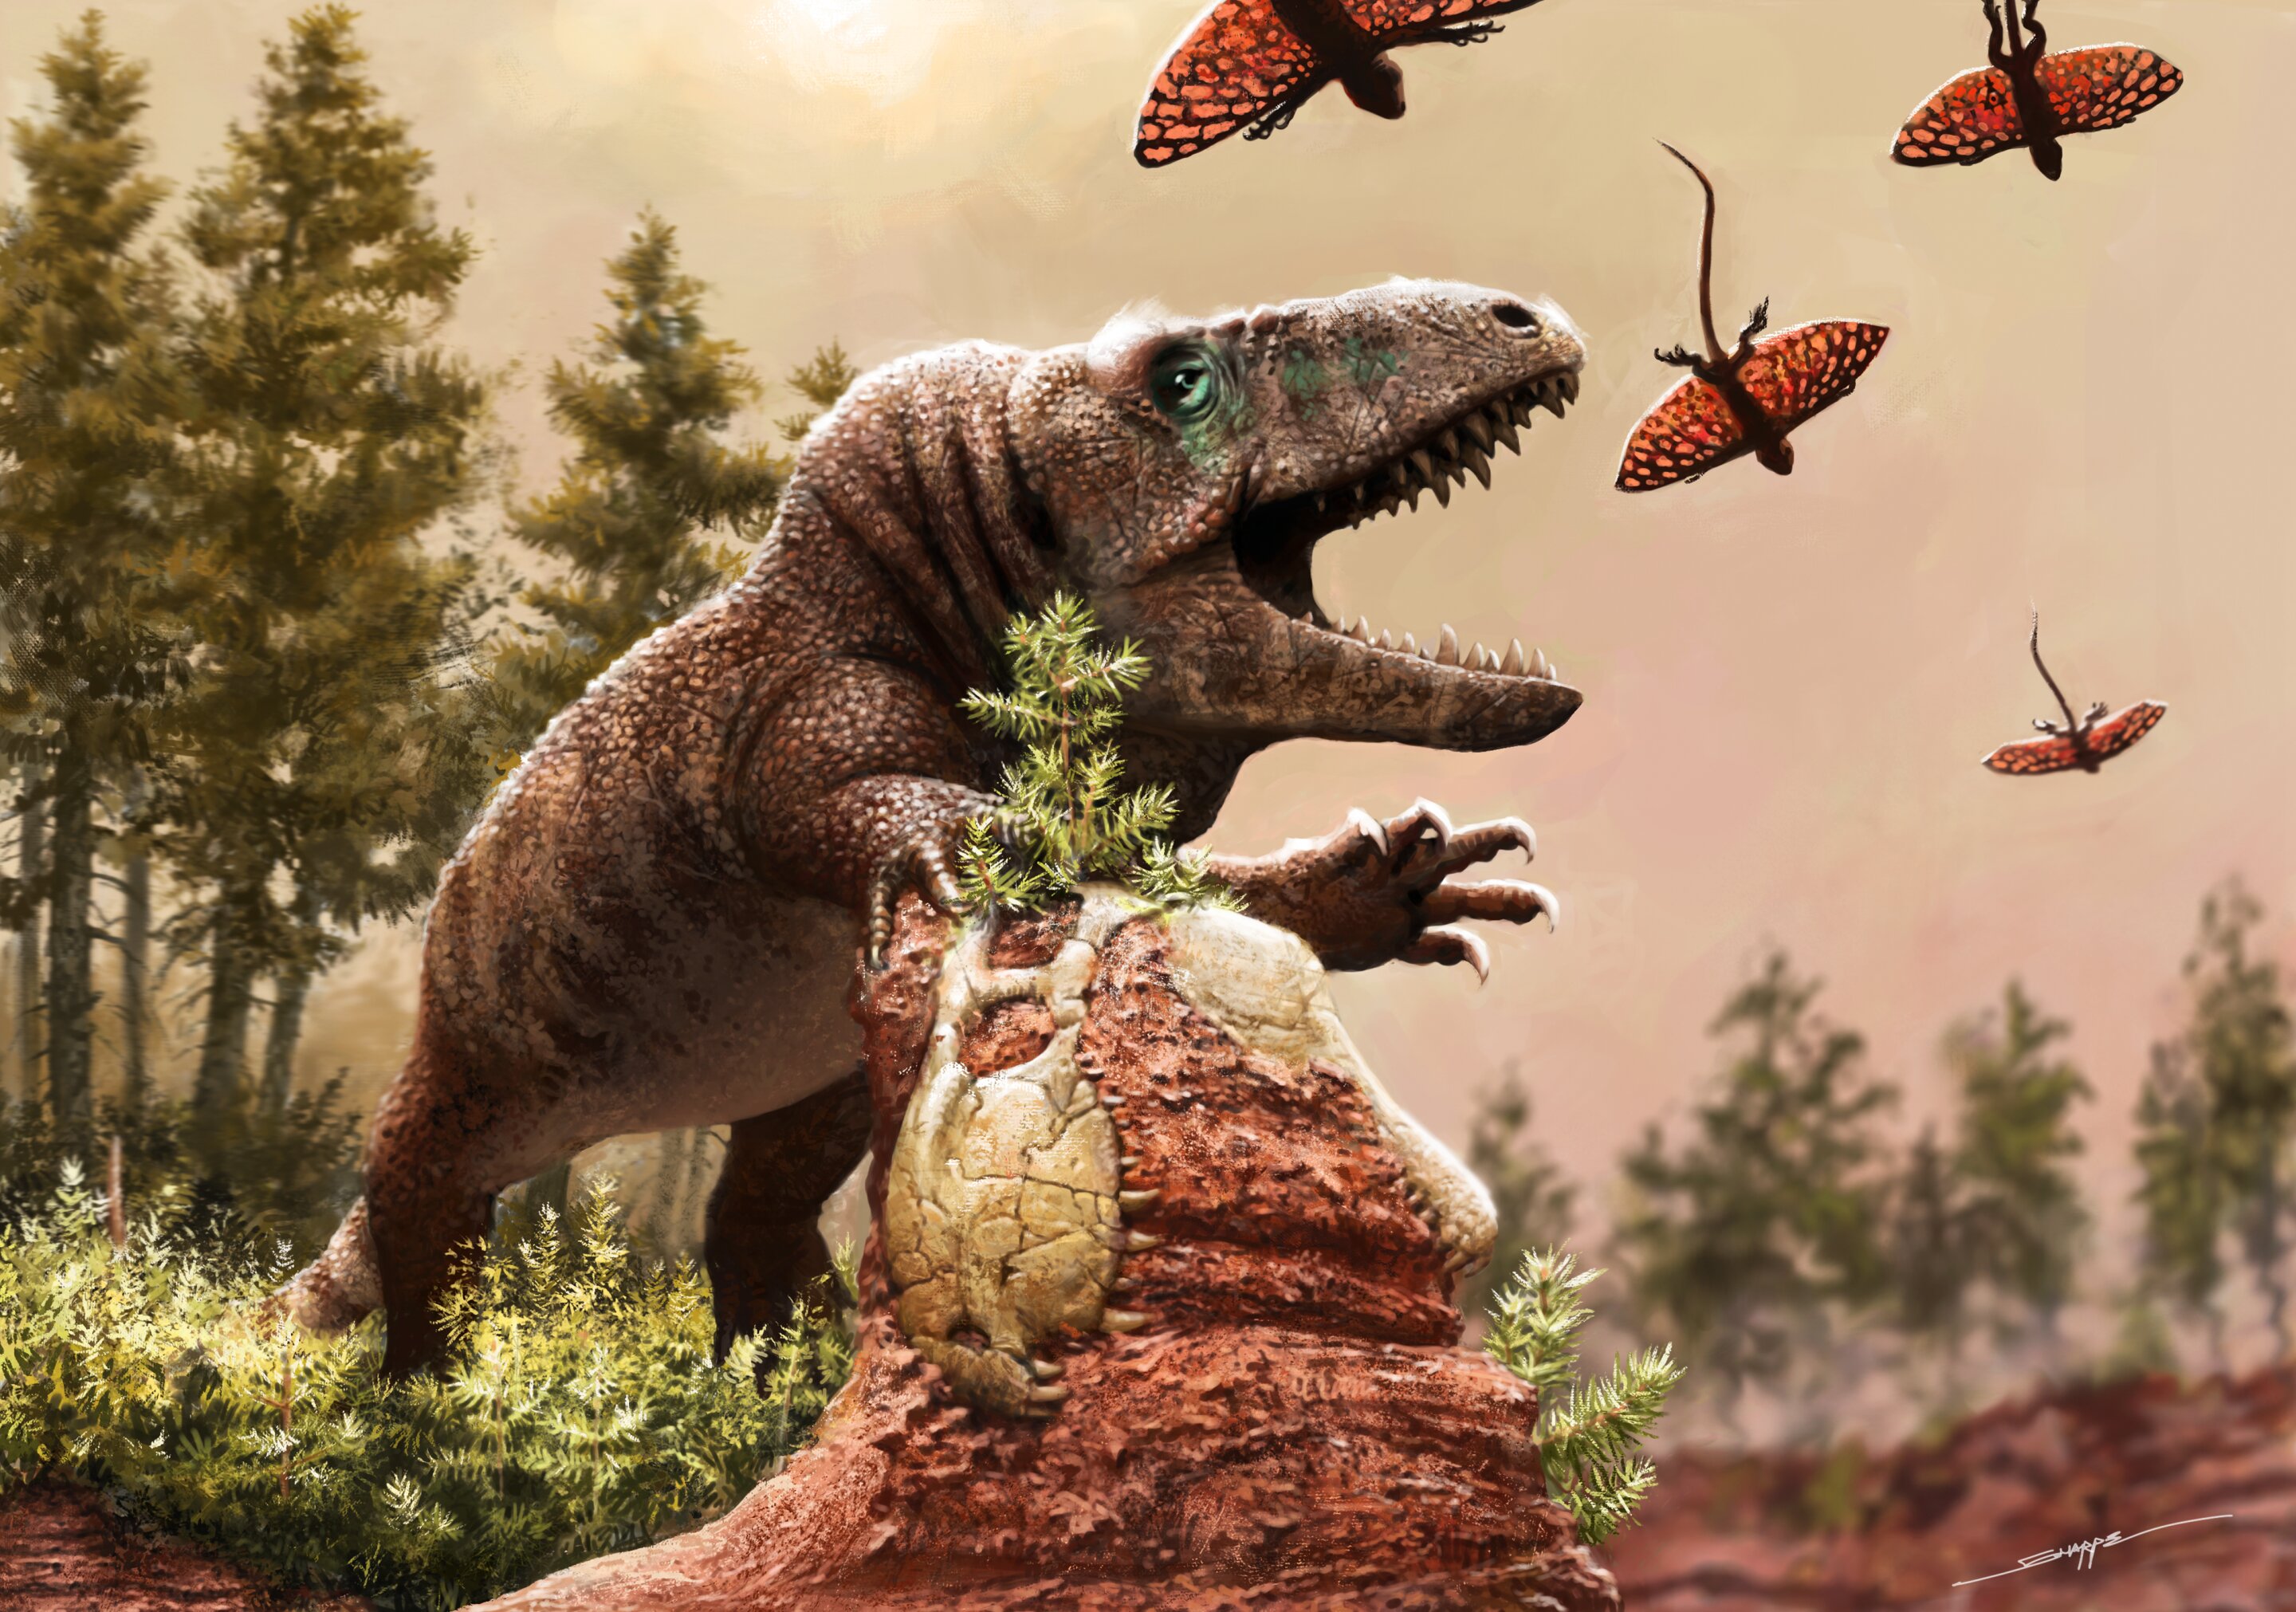 60 million years of climate change drove the evolution and diversity of reptiles